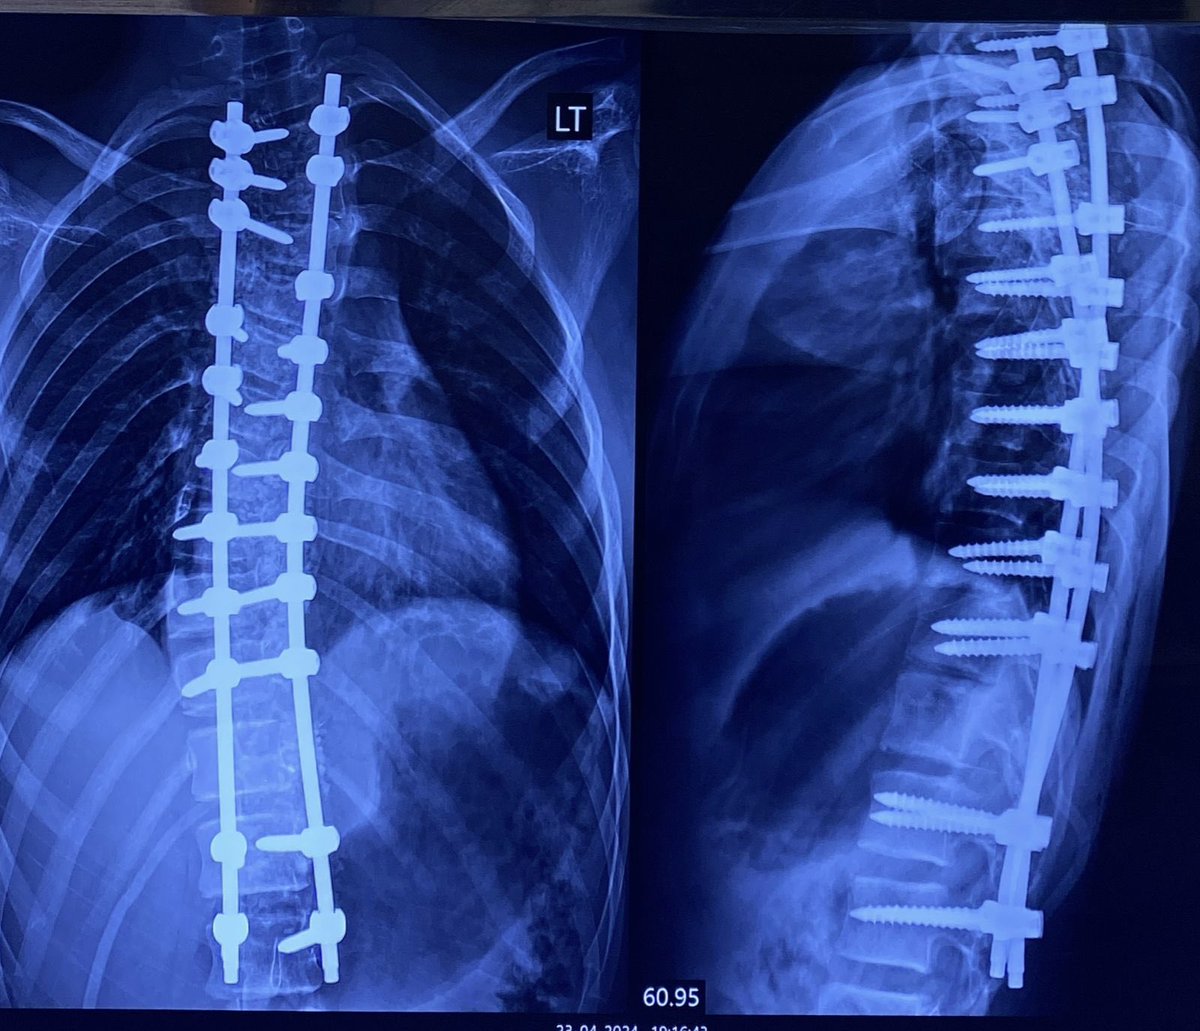 Segmental spinal instrumentation (SSI) from D2 to L2 in 16 years old boy having adolescent idiopathic scoliosis (AIS) Lenke 2CN curve. @scolionetwork  #OrthoTwitter #MedTwitter #spine